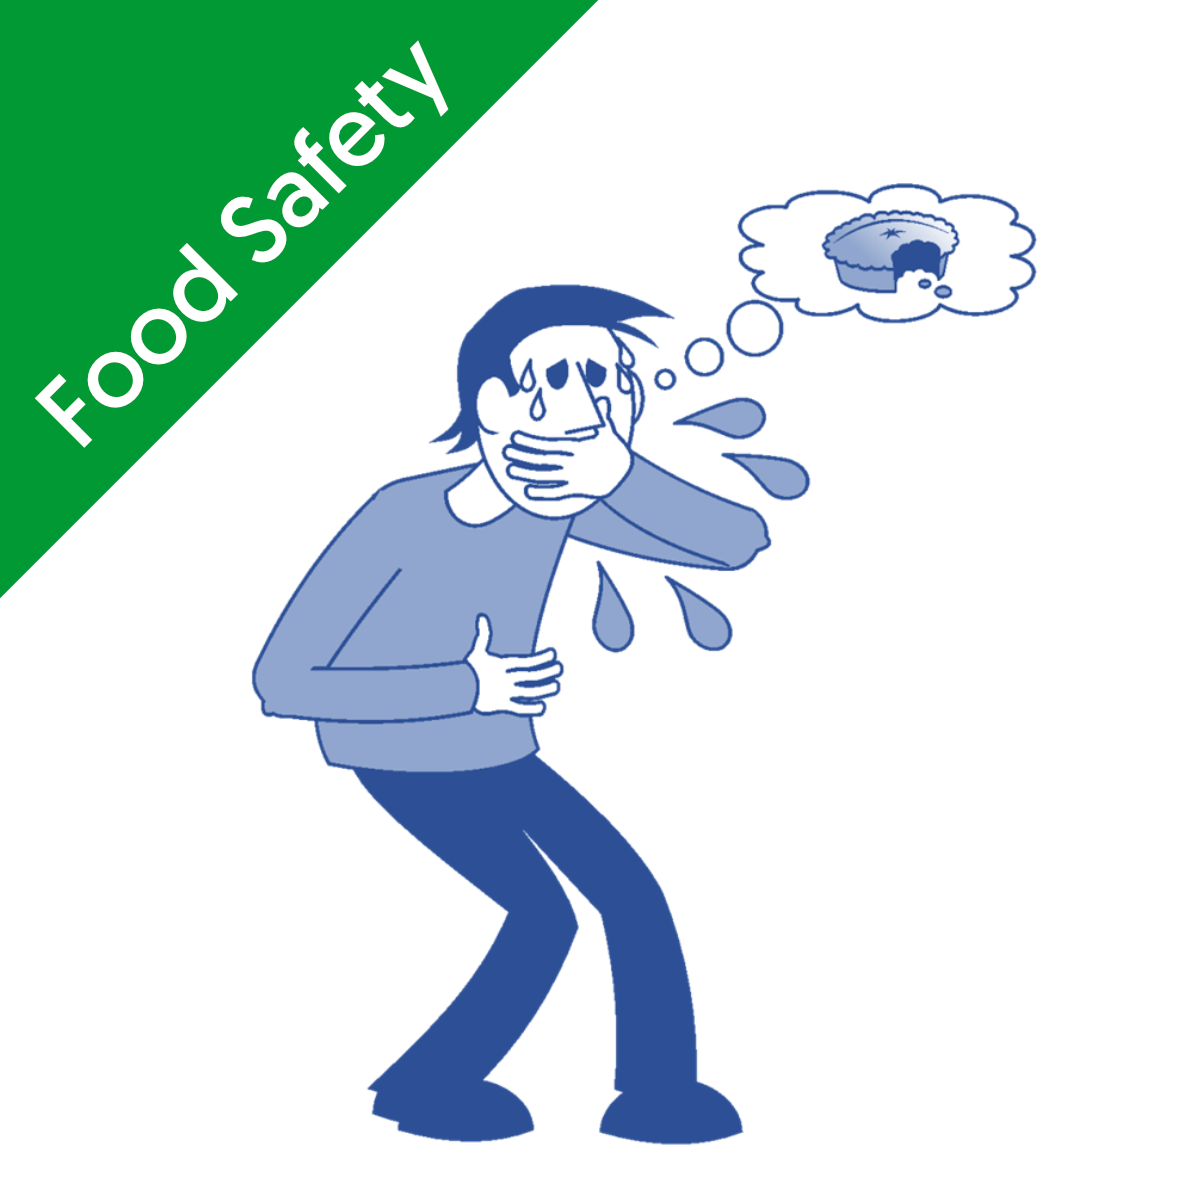 Threats to food safety